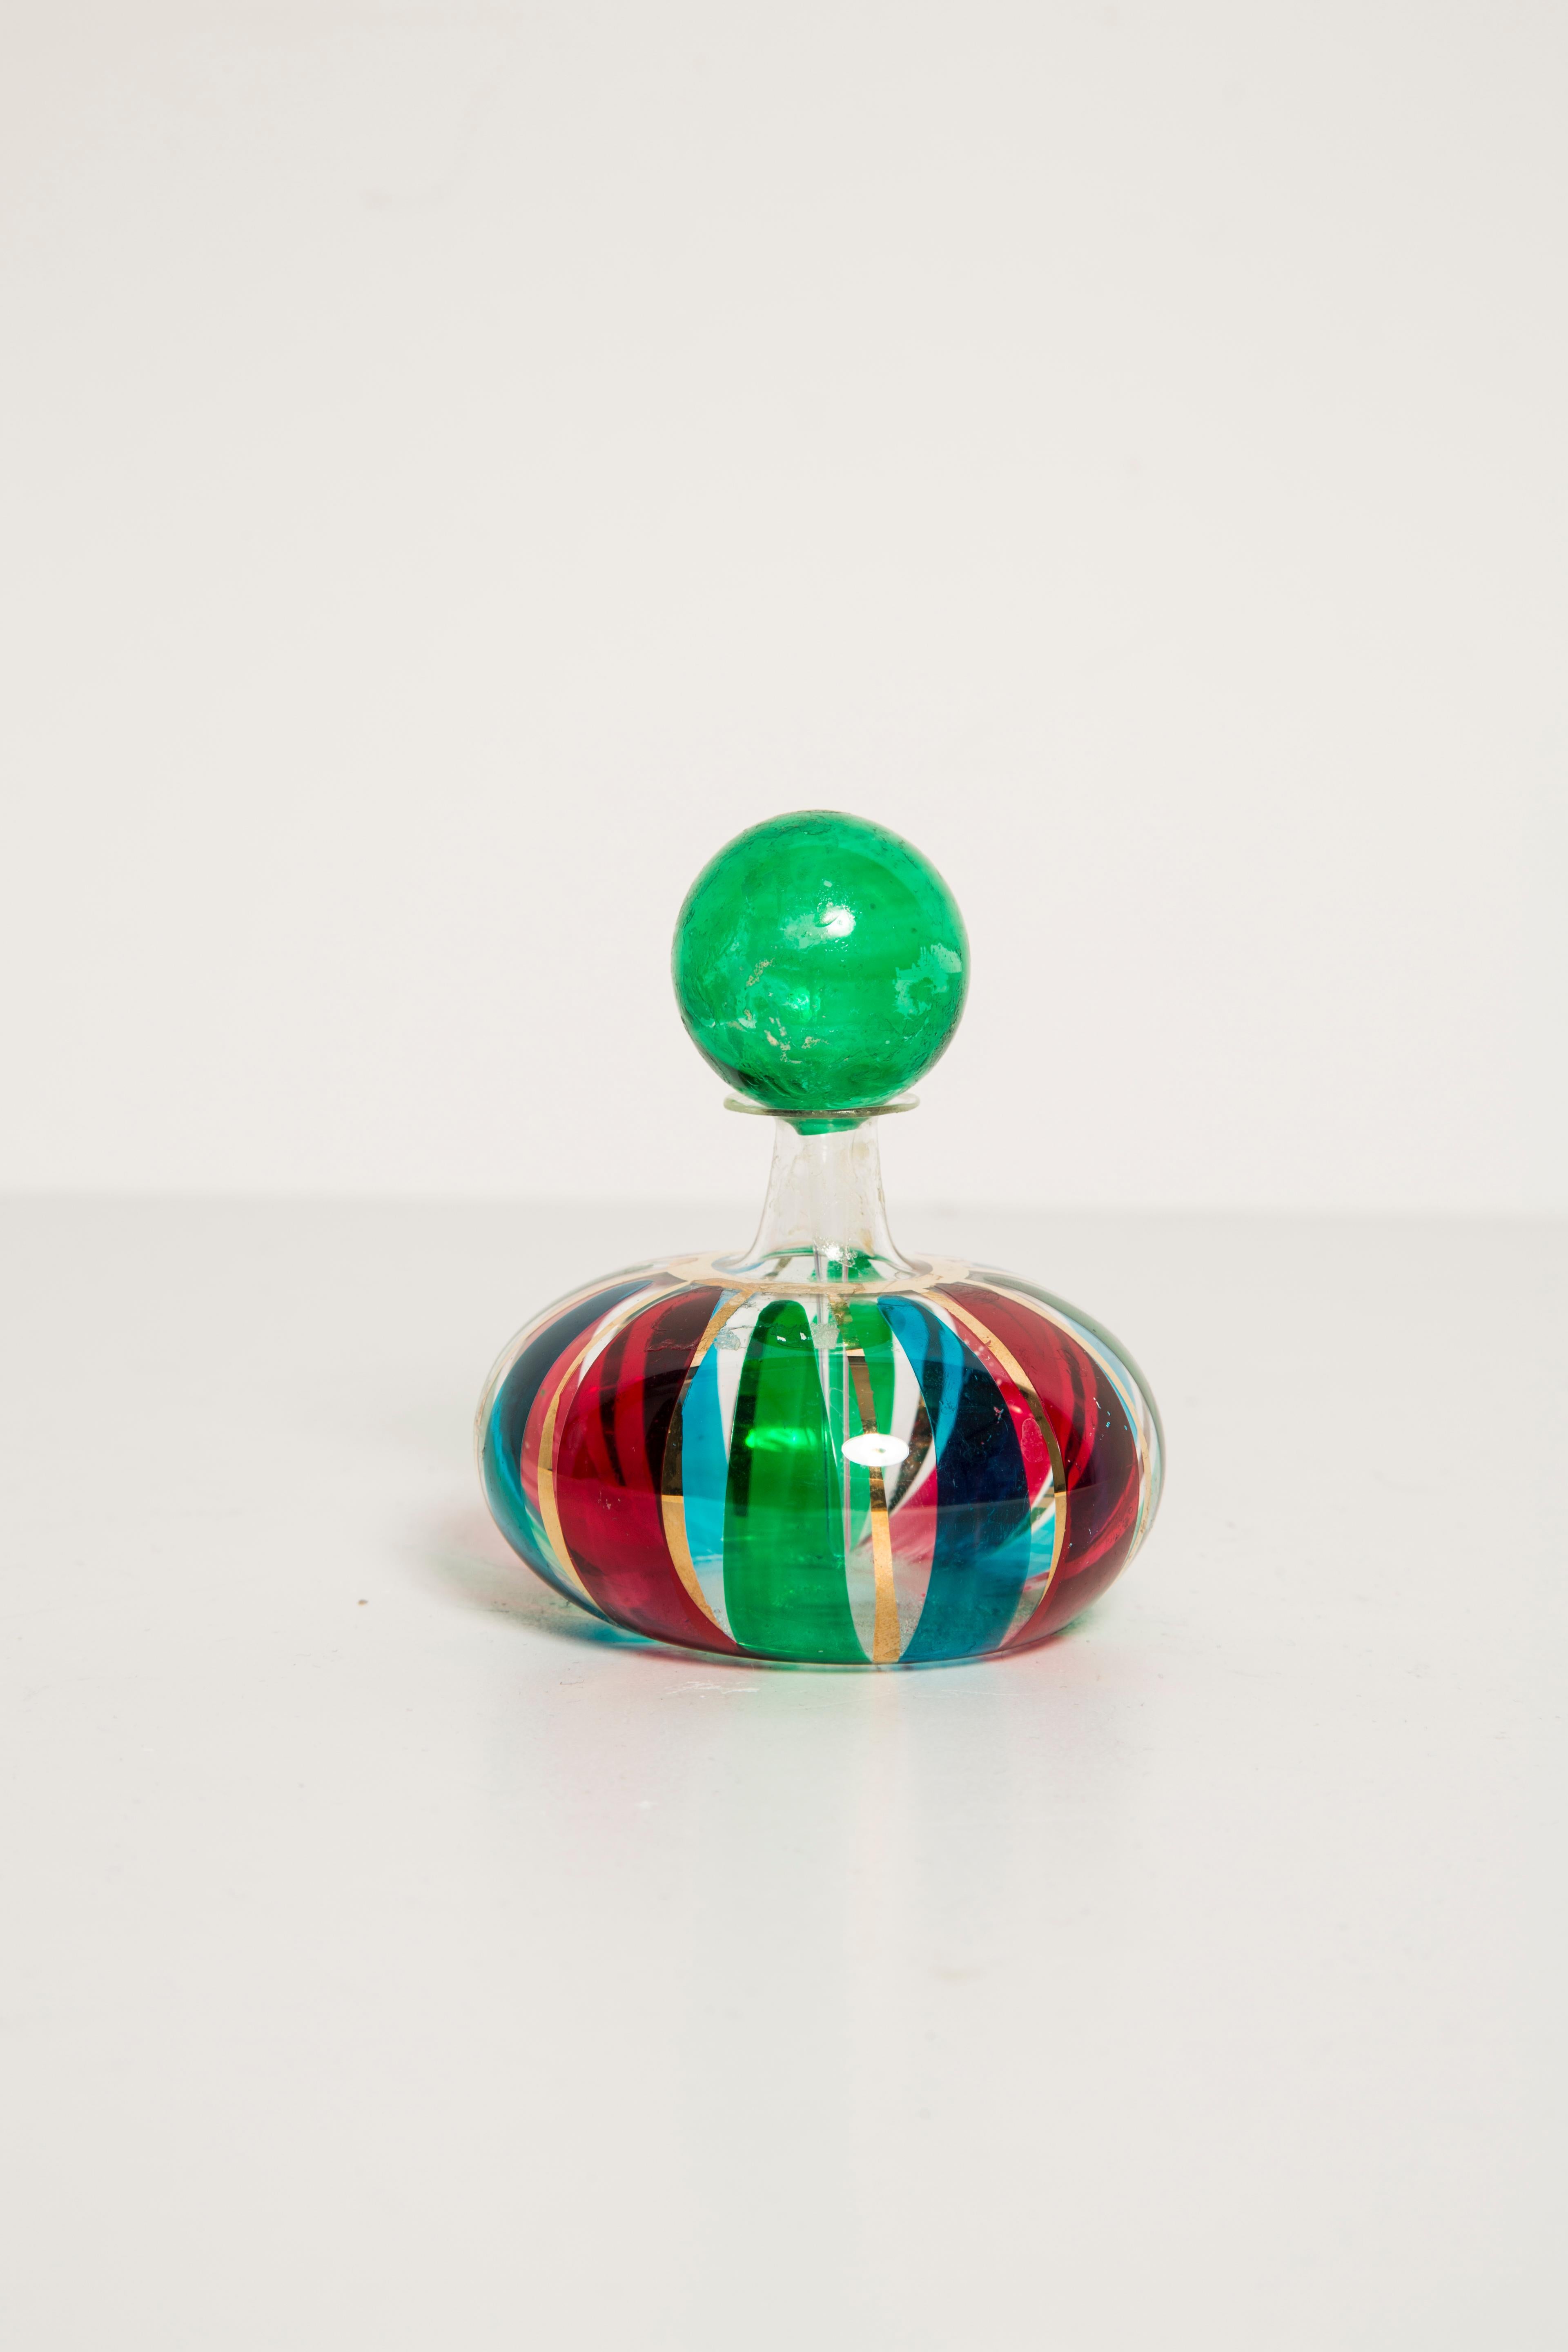 Mini Midcentury Red Green and Blue Empoli Vase for Perfume, Italy, 1960s For Sale 2